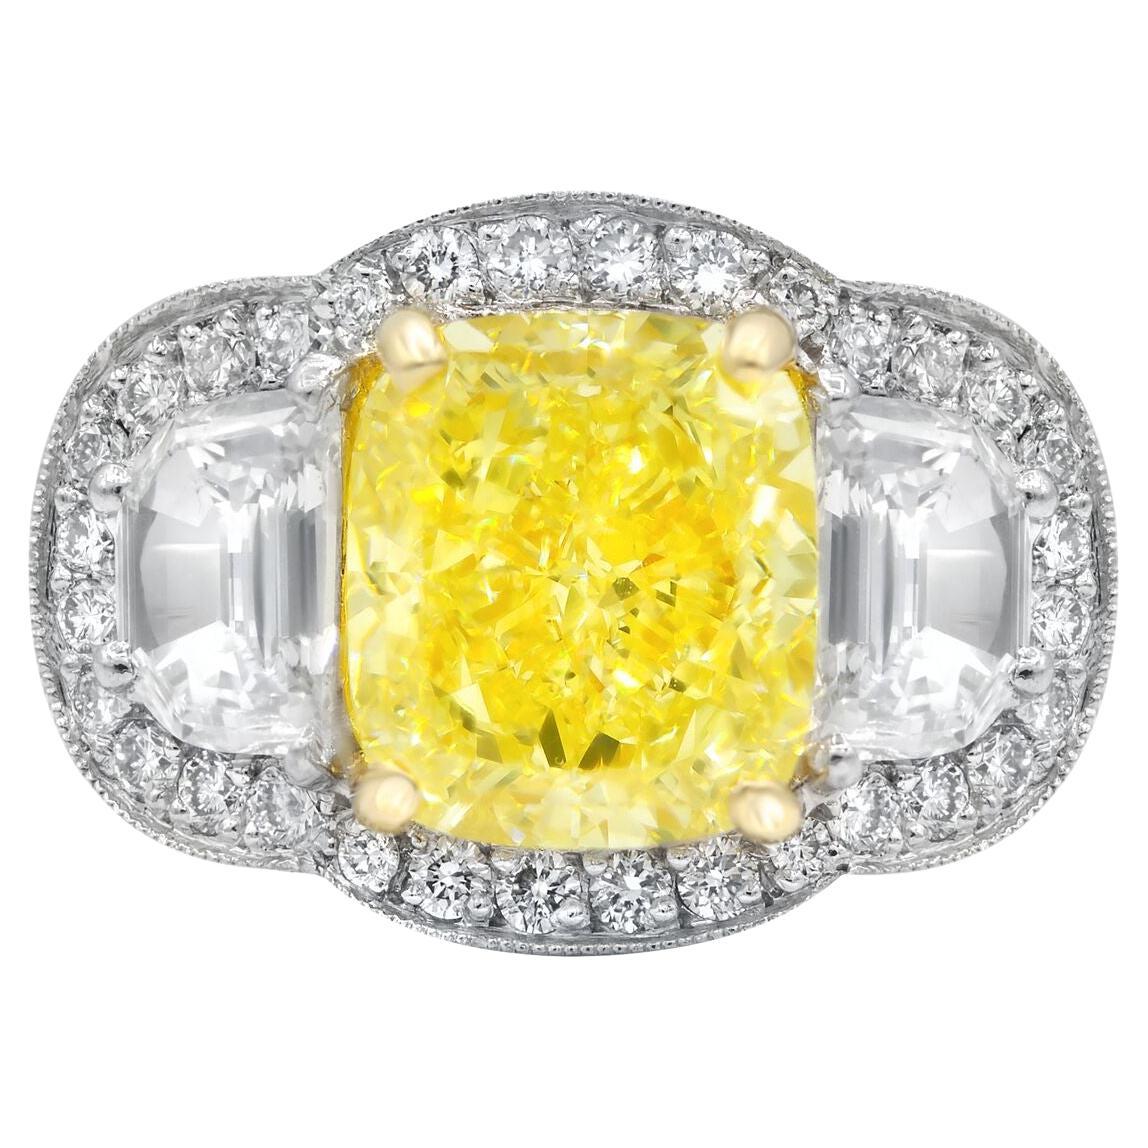 Platinum and 18 kt yellow gold diamond ring featuring a center (FY VS1) 5.23 ct cushion cut yellow diamond with 2 half moon shaped diamonds on the sides and surrounded by 1.90 cts tw of white diamonds 

Diana M is one-stop shop for all your jewelry